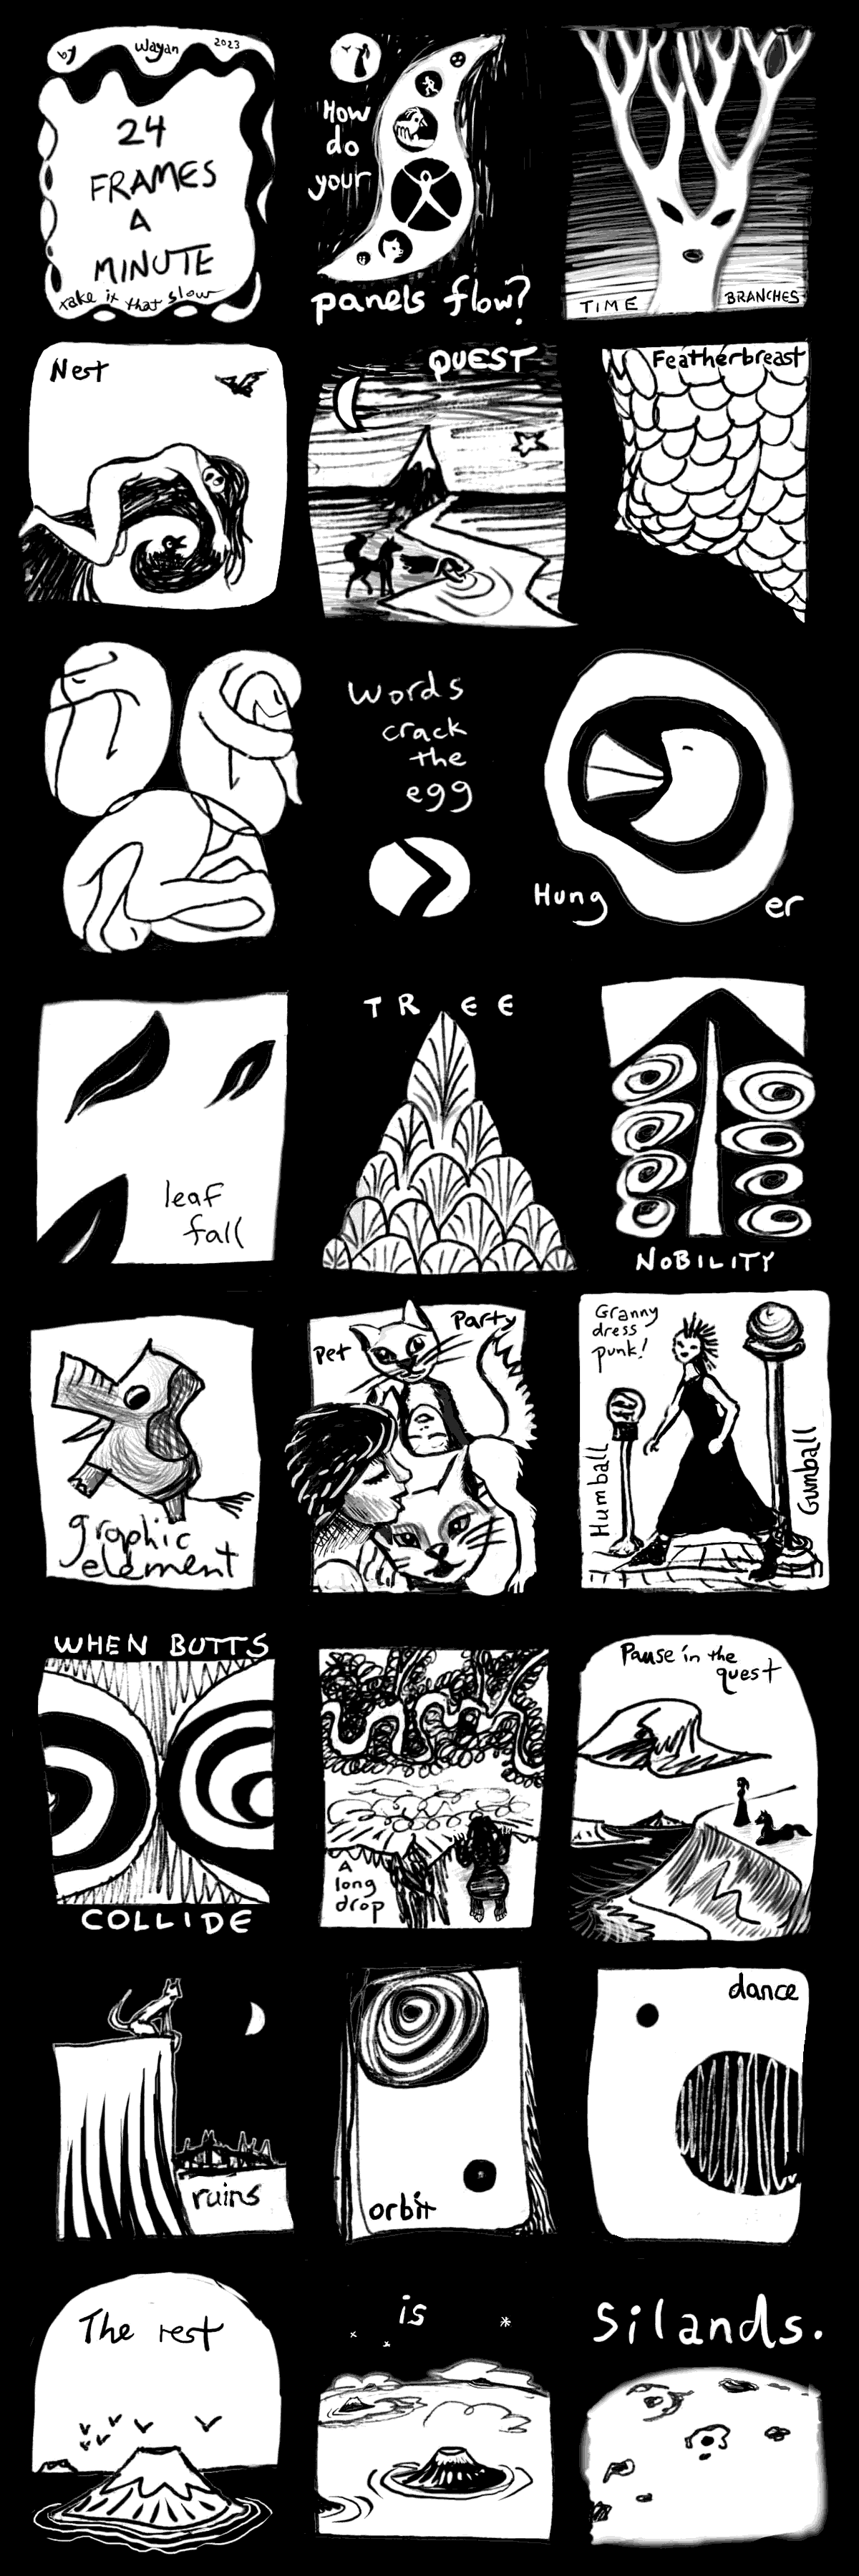 '24 Panels a Minute', an ink improv comic by Wayan.